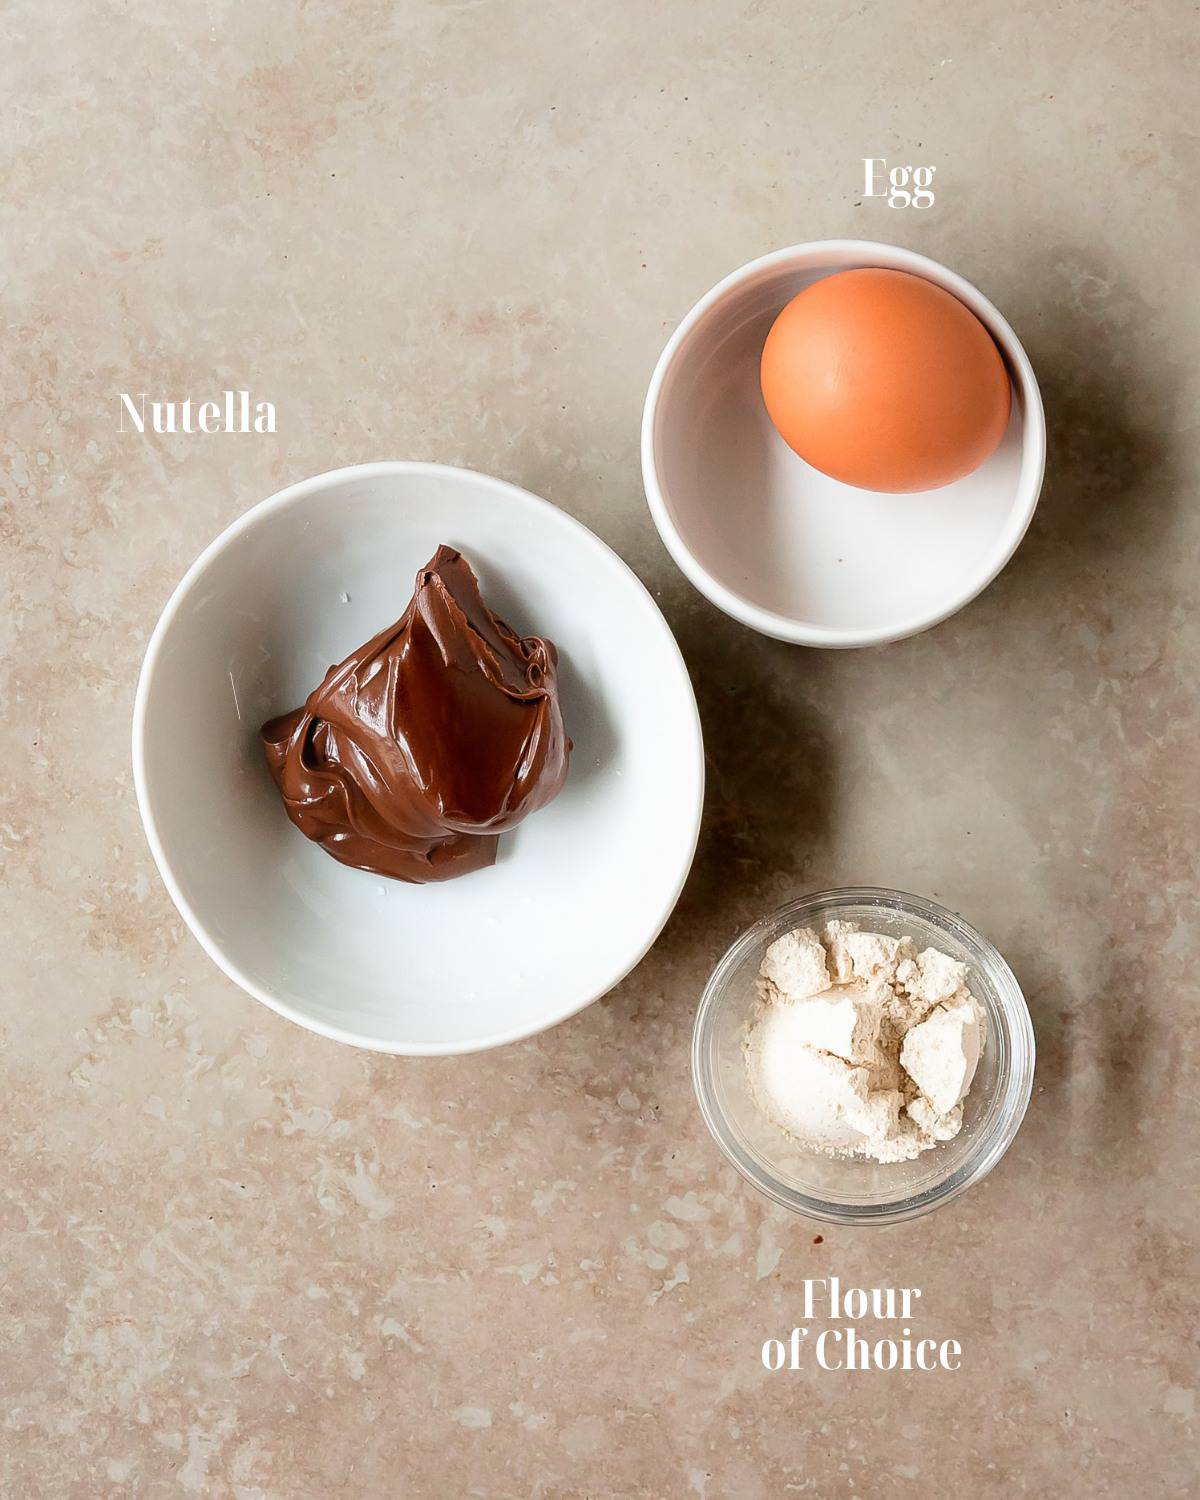 Gather Nutella, an egg and your preferred flour.  